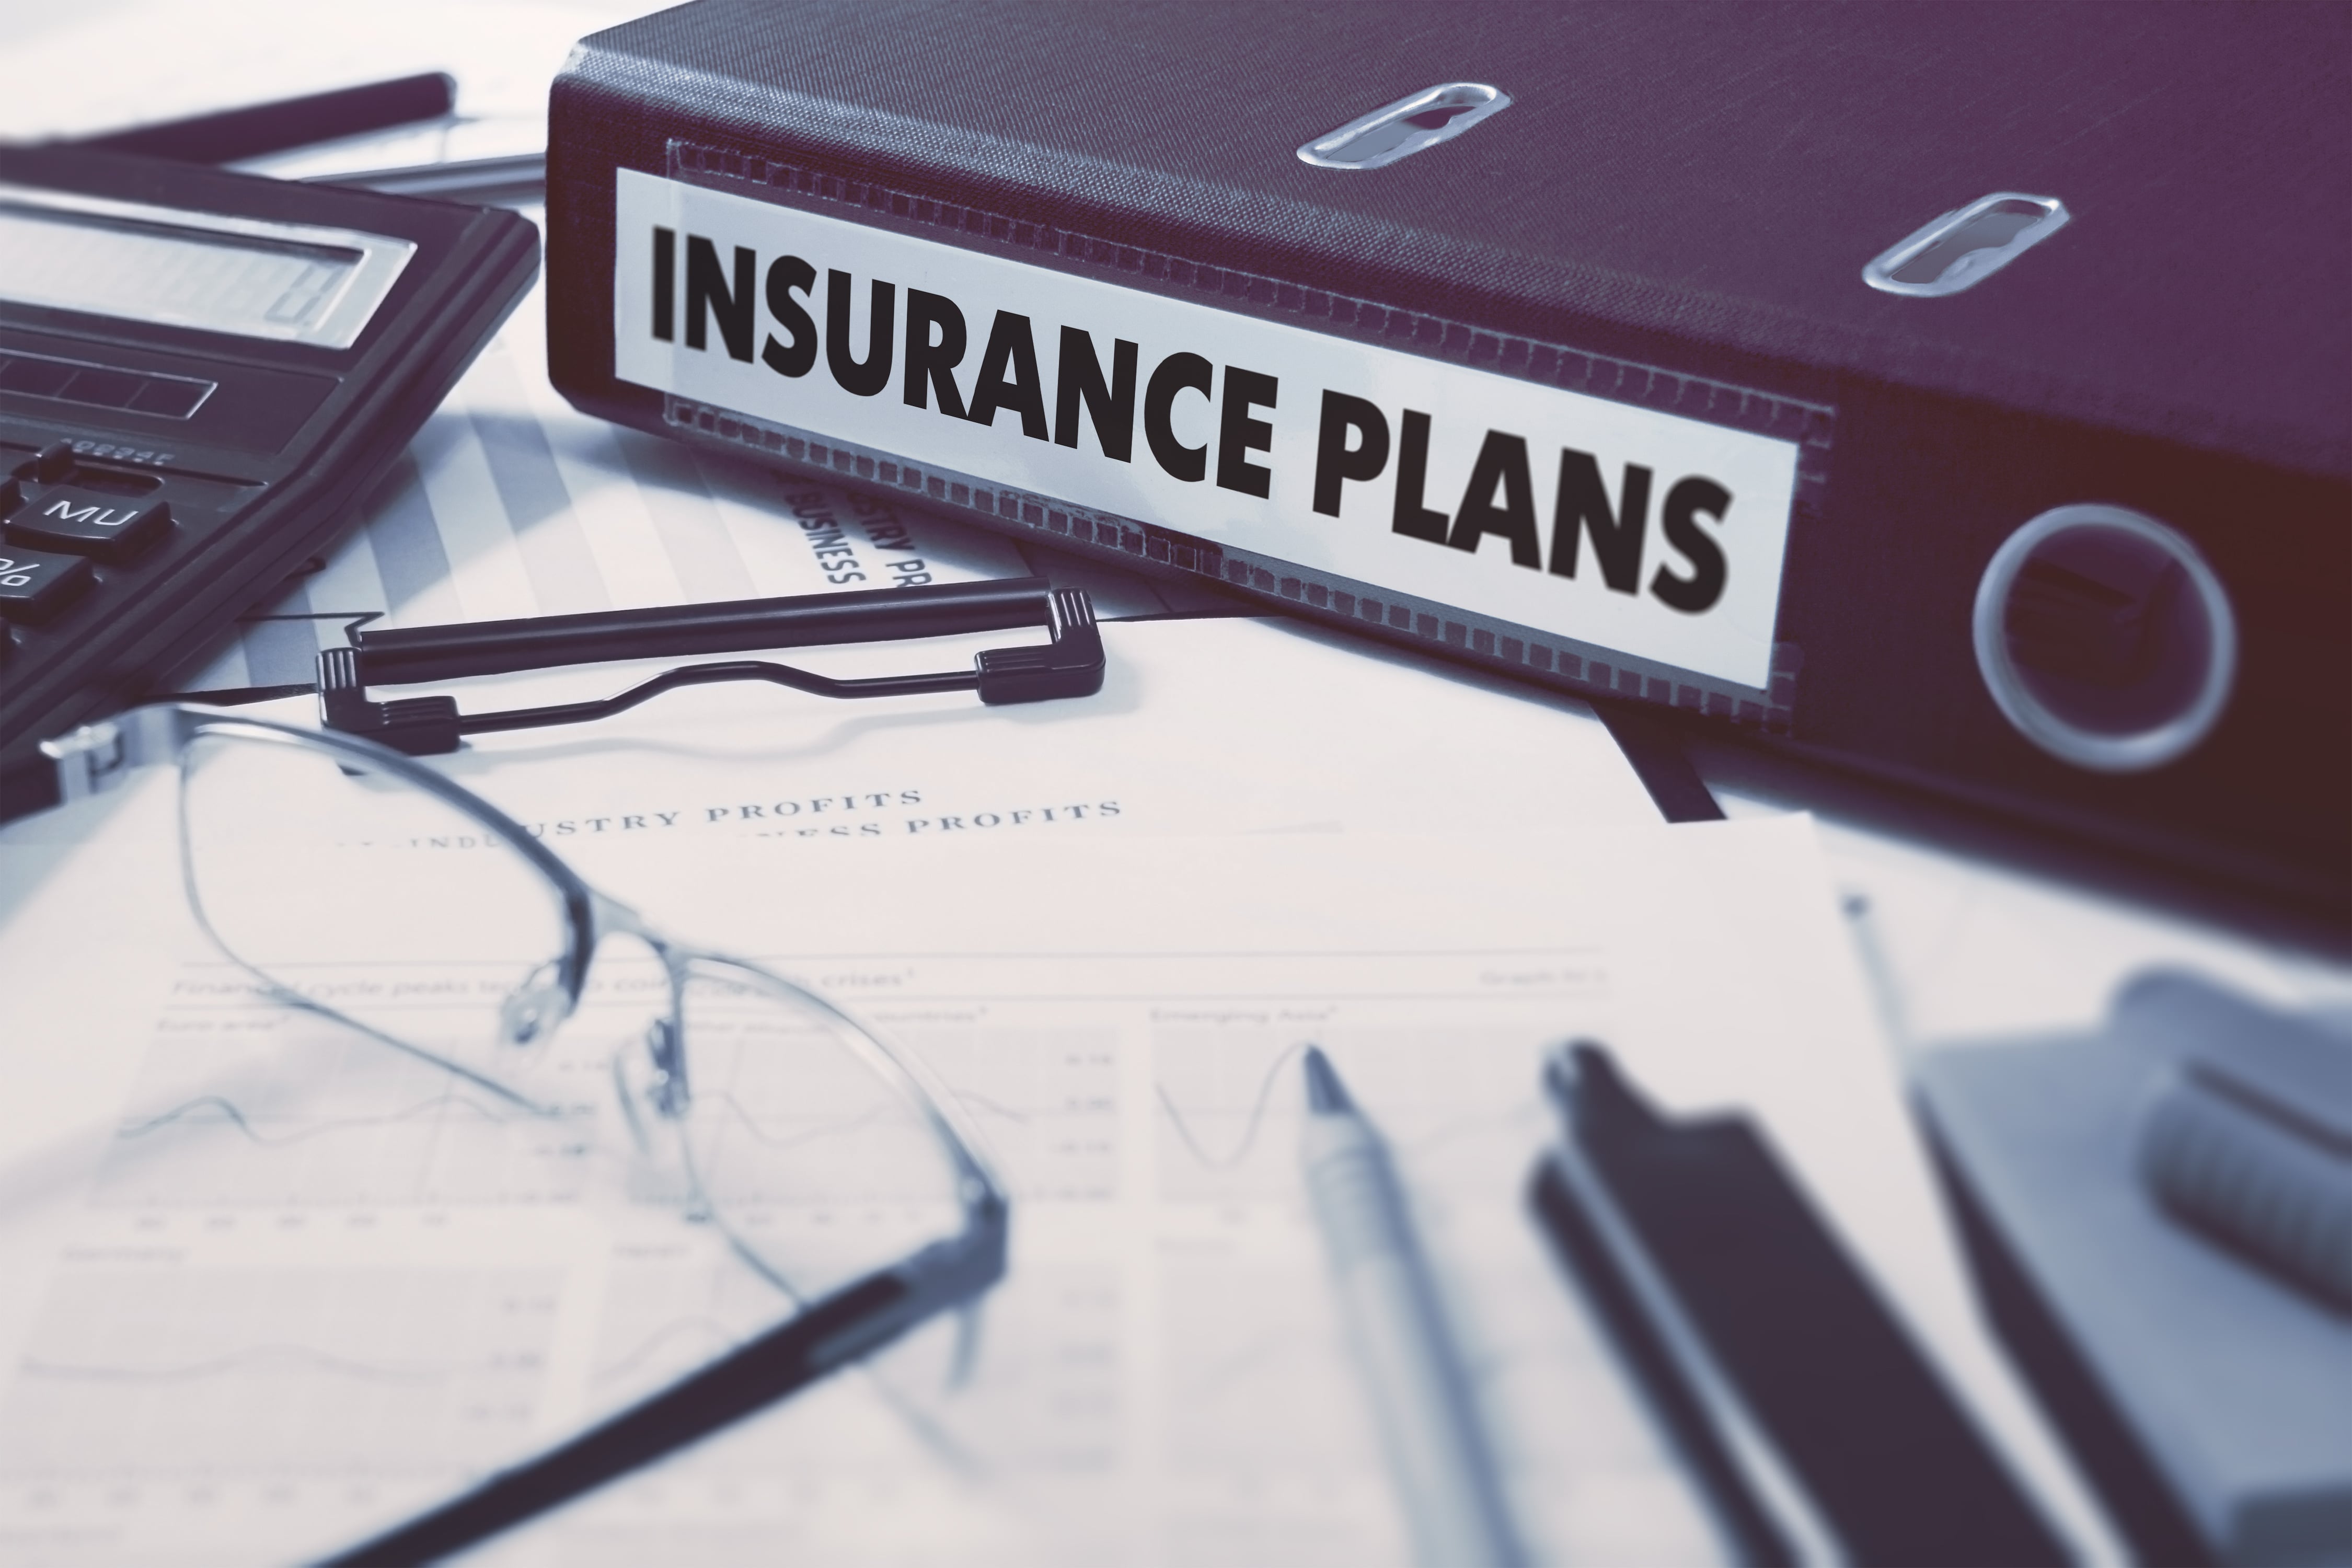 insurance-plans-ring-binder-on-office-desktop-with-office-supplies-business-concept-on-blurred-backg